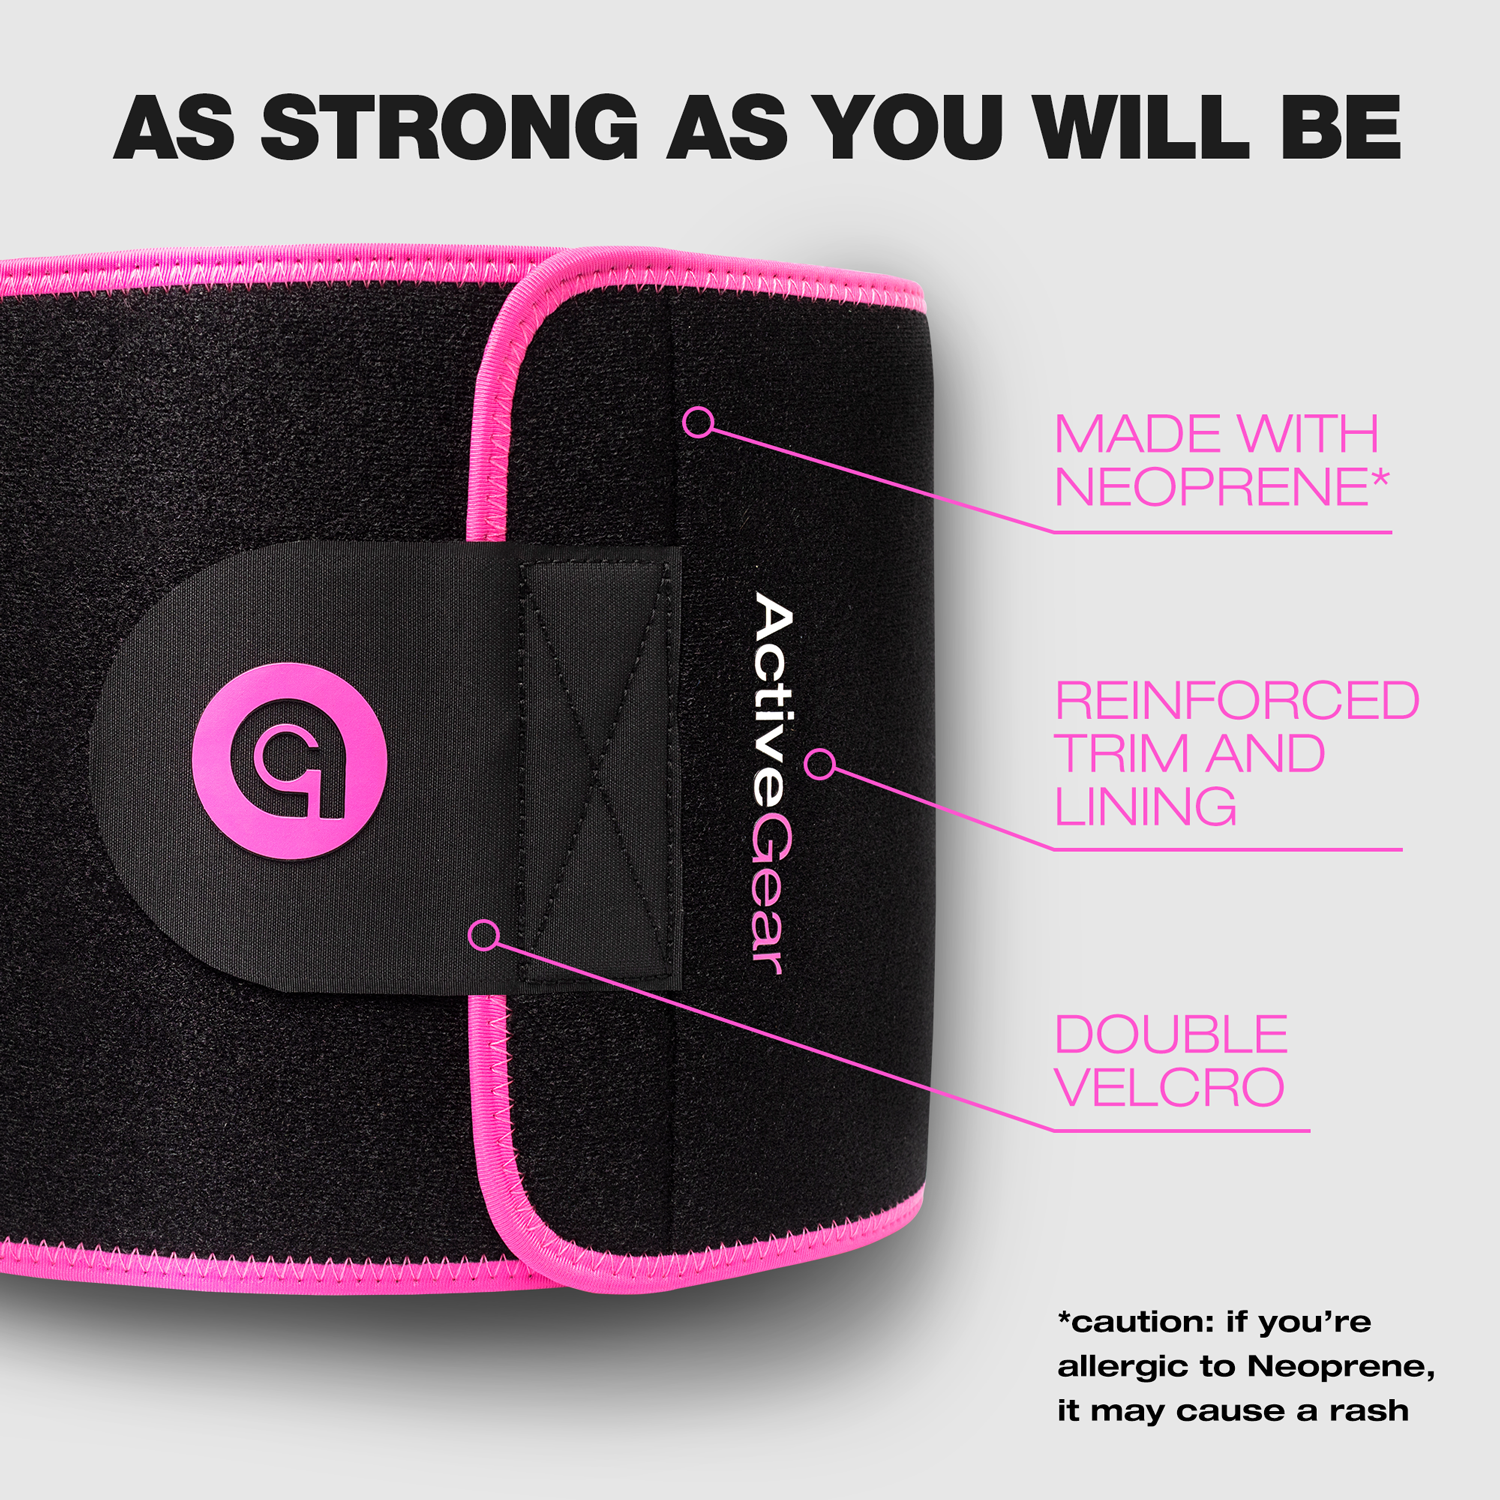 Waist Trimmer Belt - The Best Support to a Slimmer & Toned You